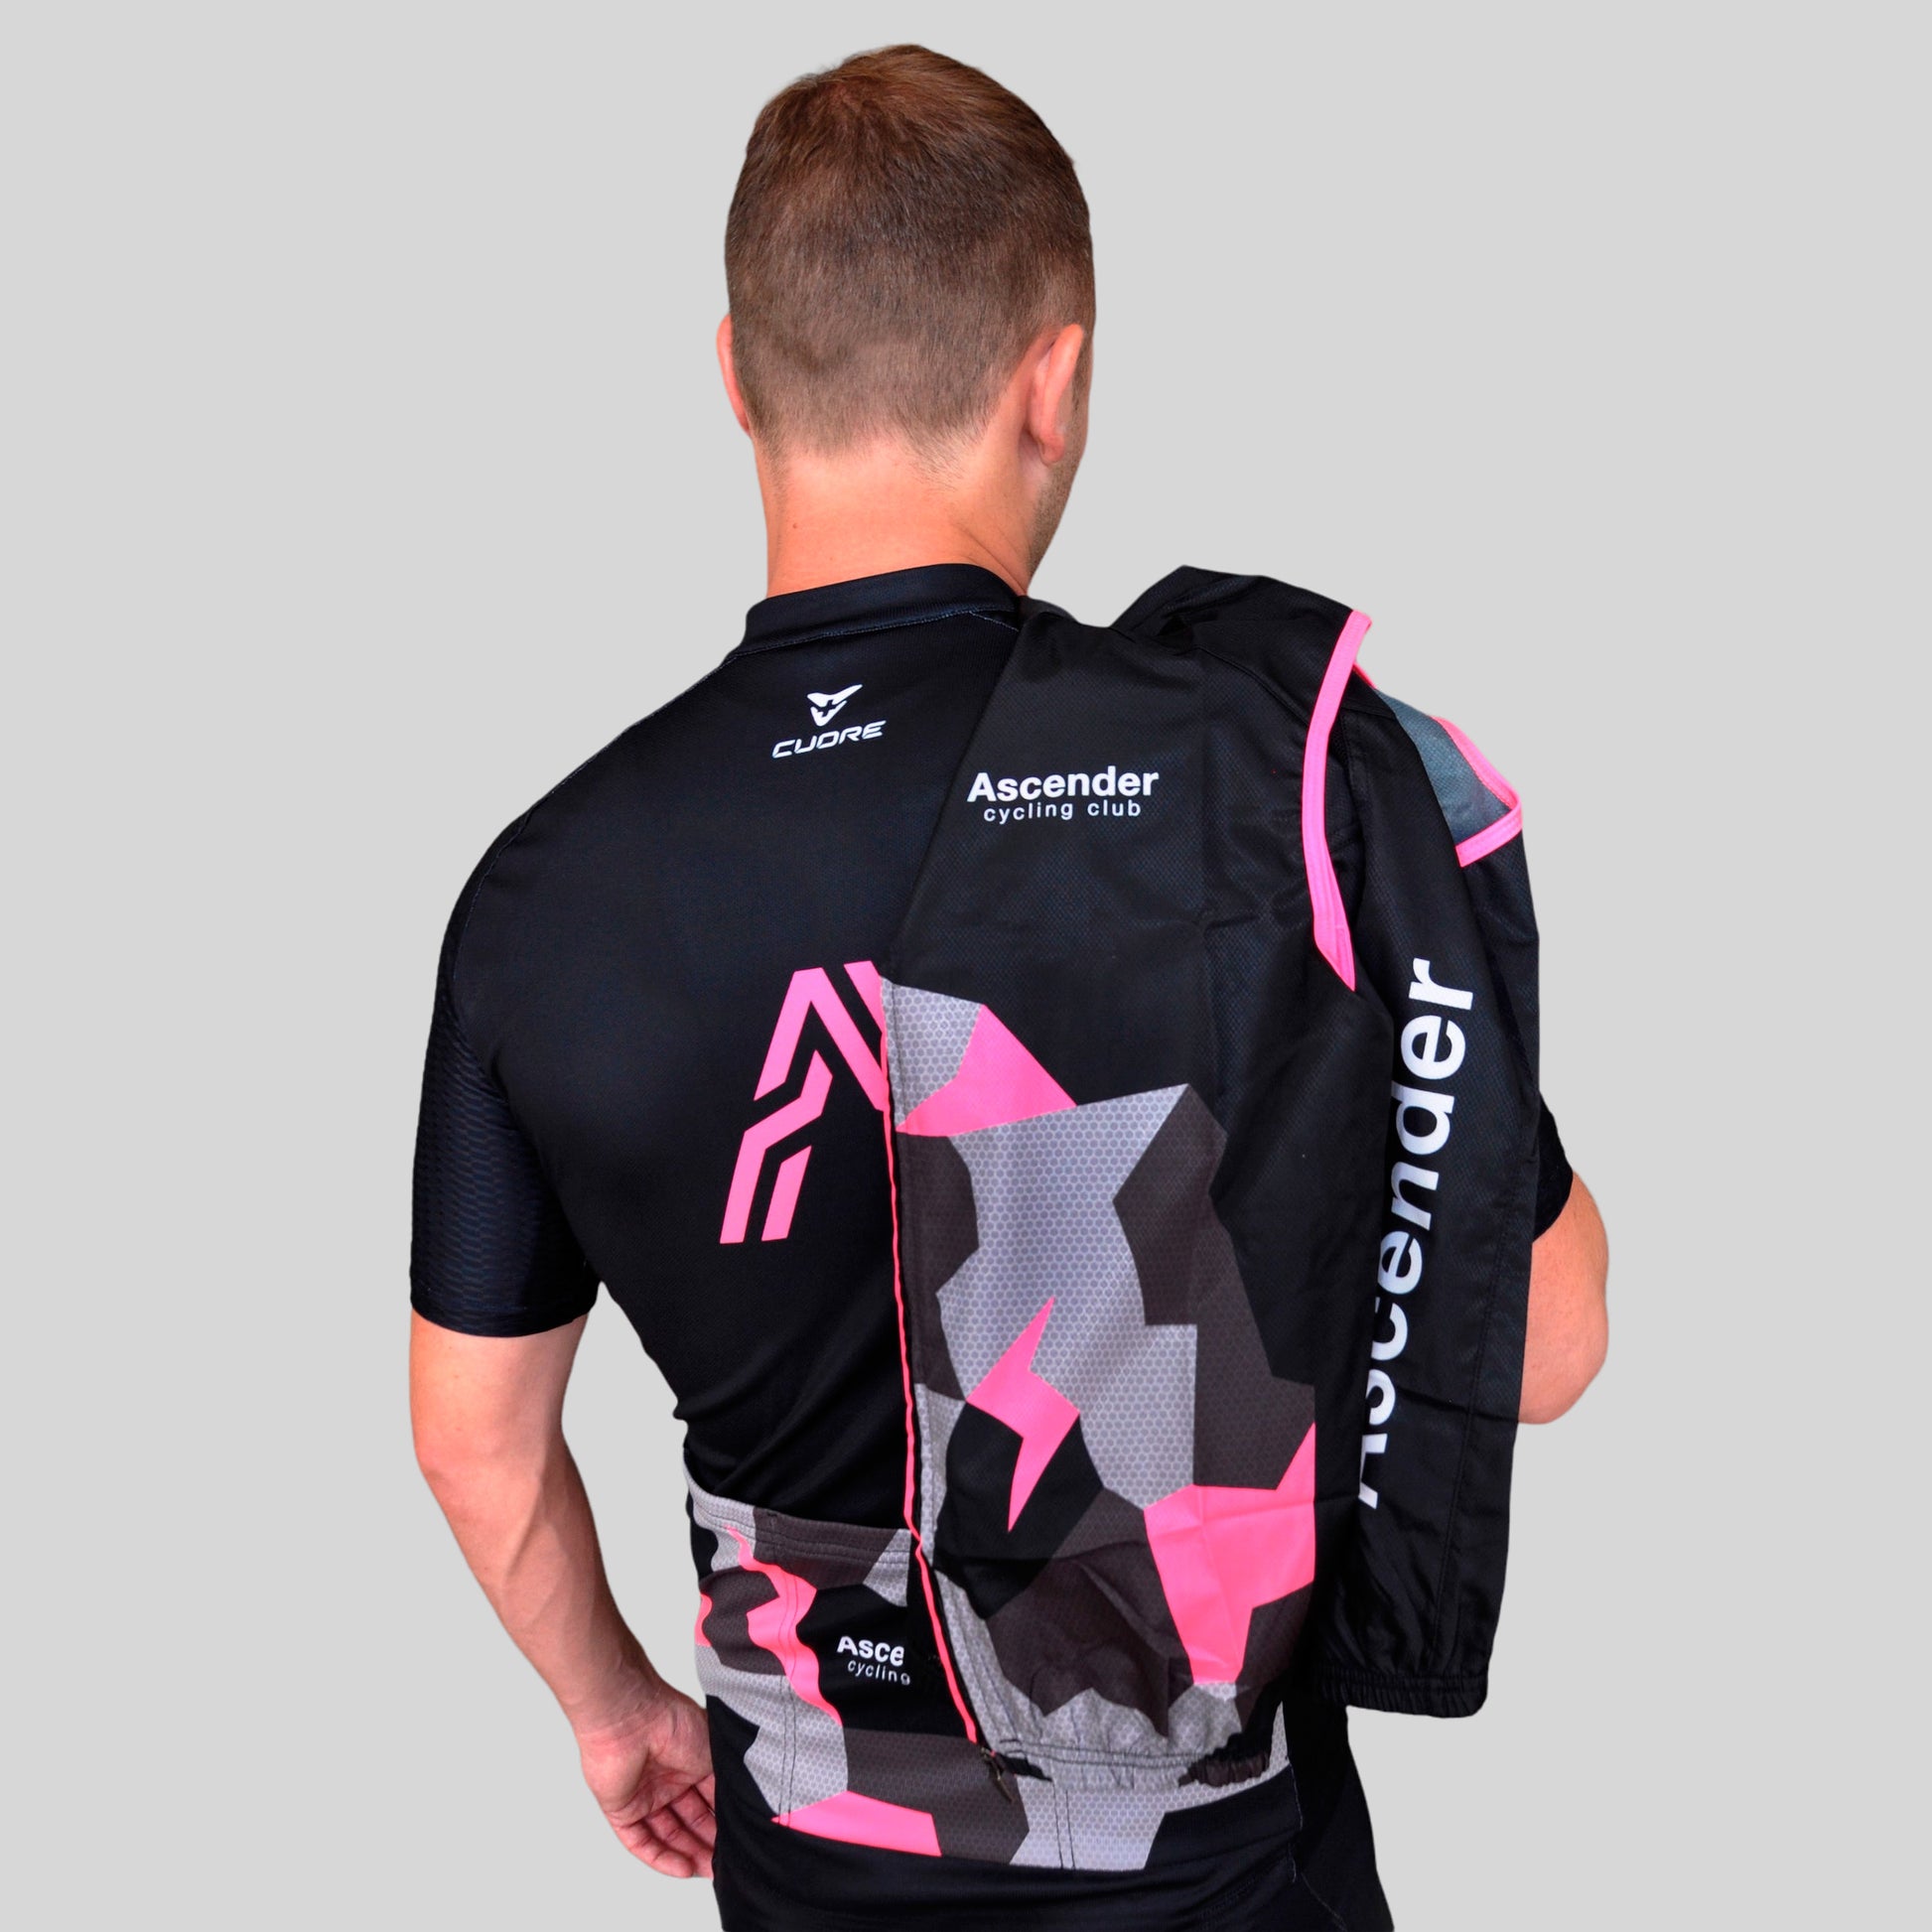 LB Camo Pink Windshield Mesh Vest from Ascender Cycling Club and Cuore of Switzerland Intro View